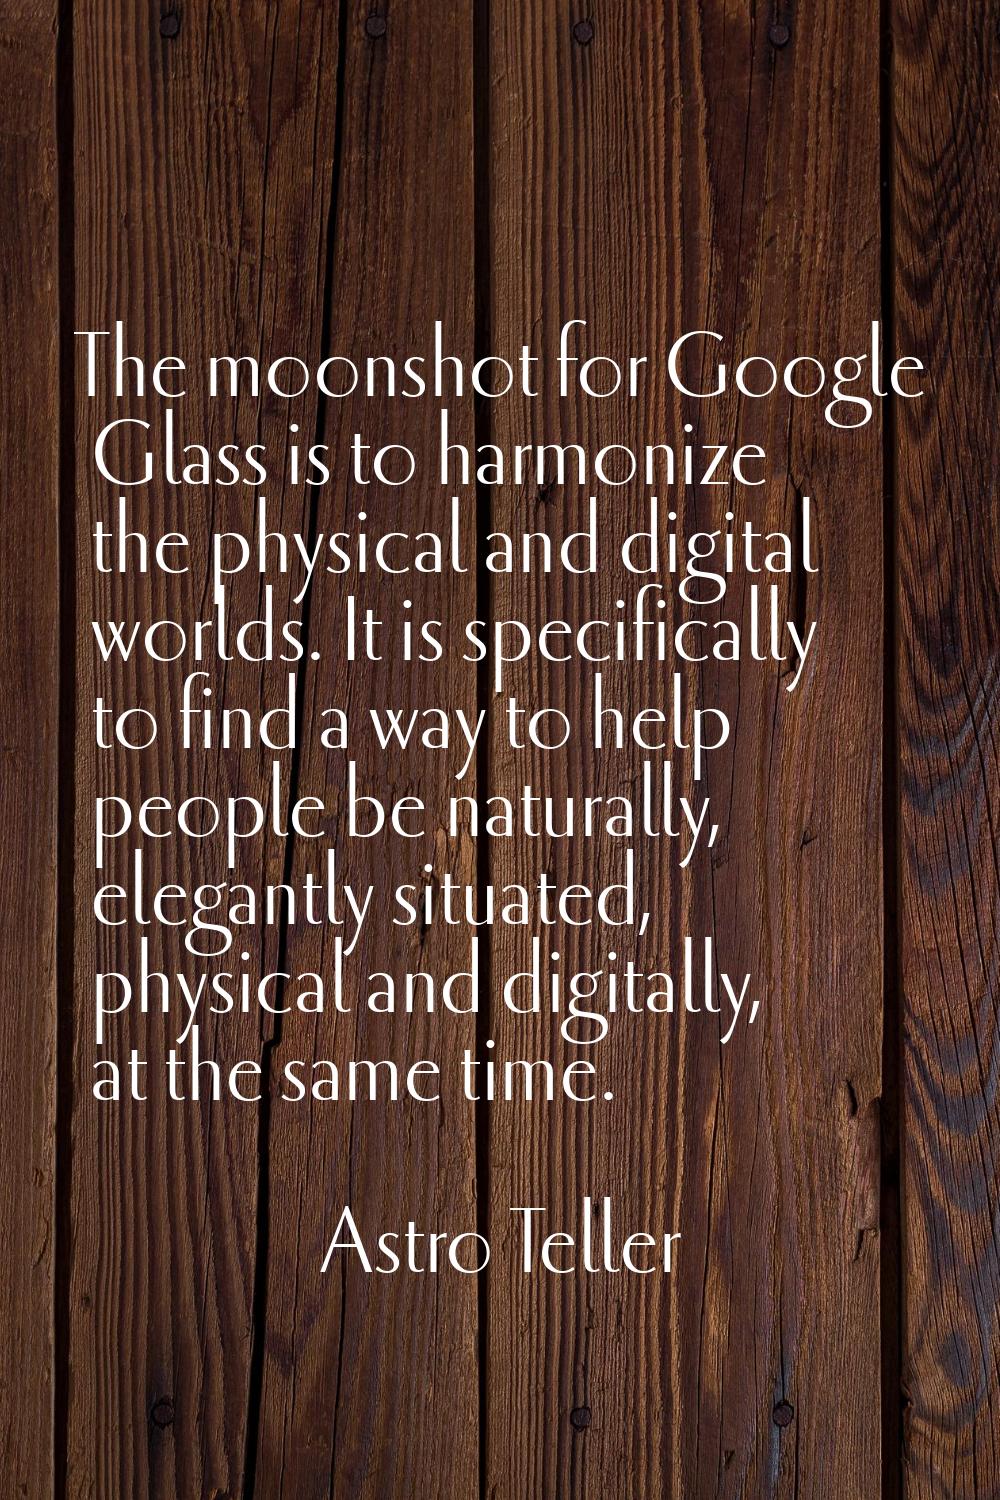 The moonshot for Google Glass is to harmonize the physical and digital worlds. It is specifically t